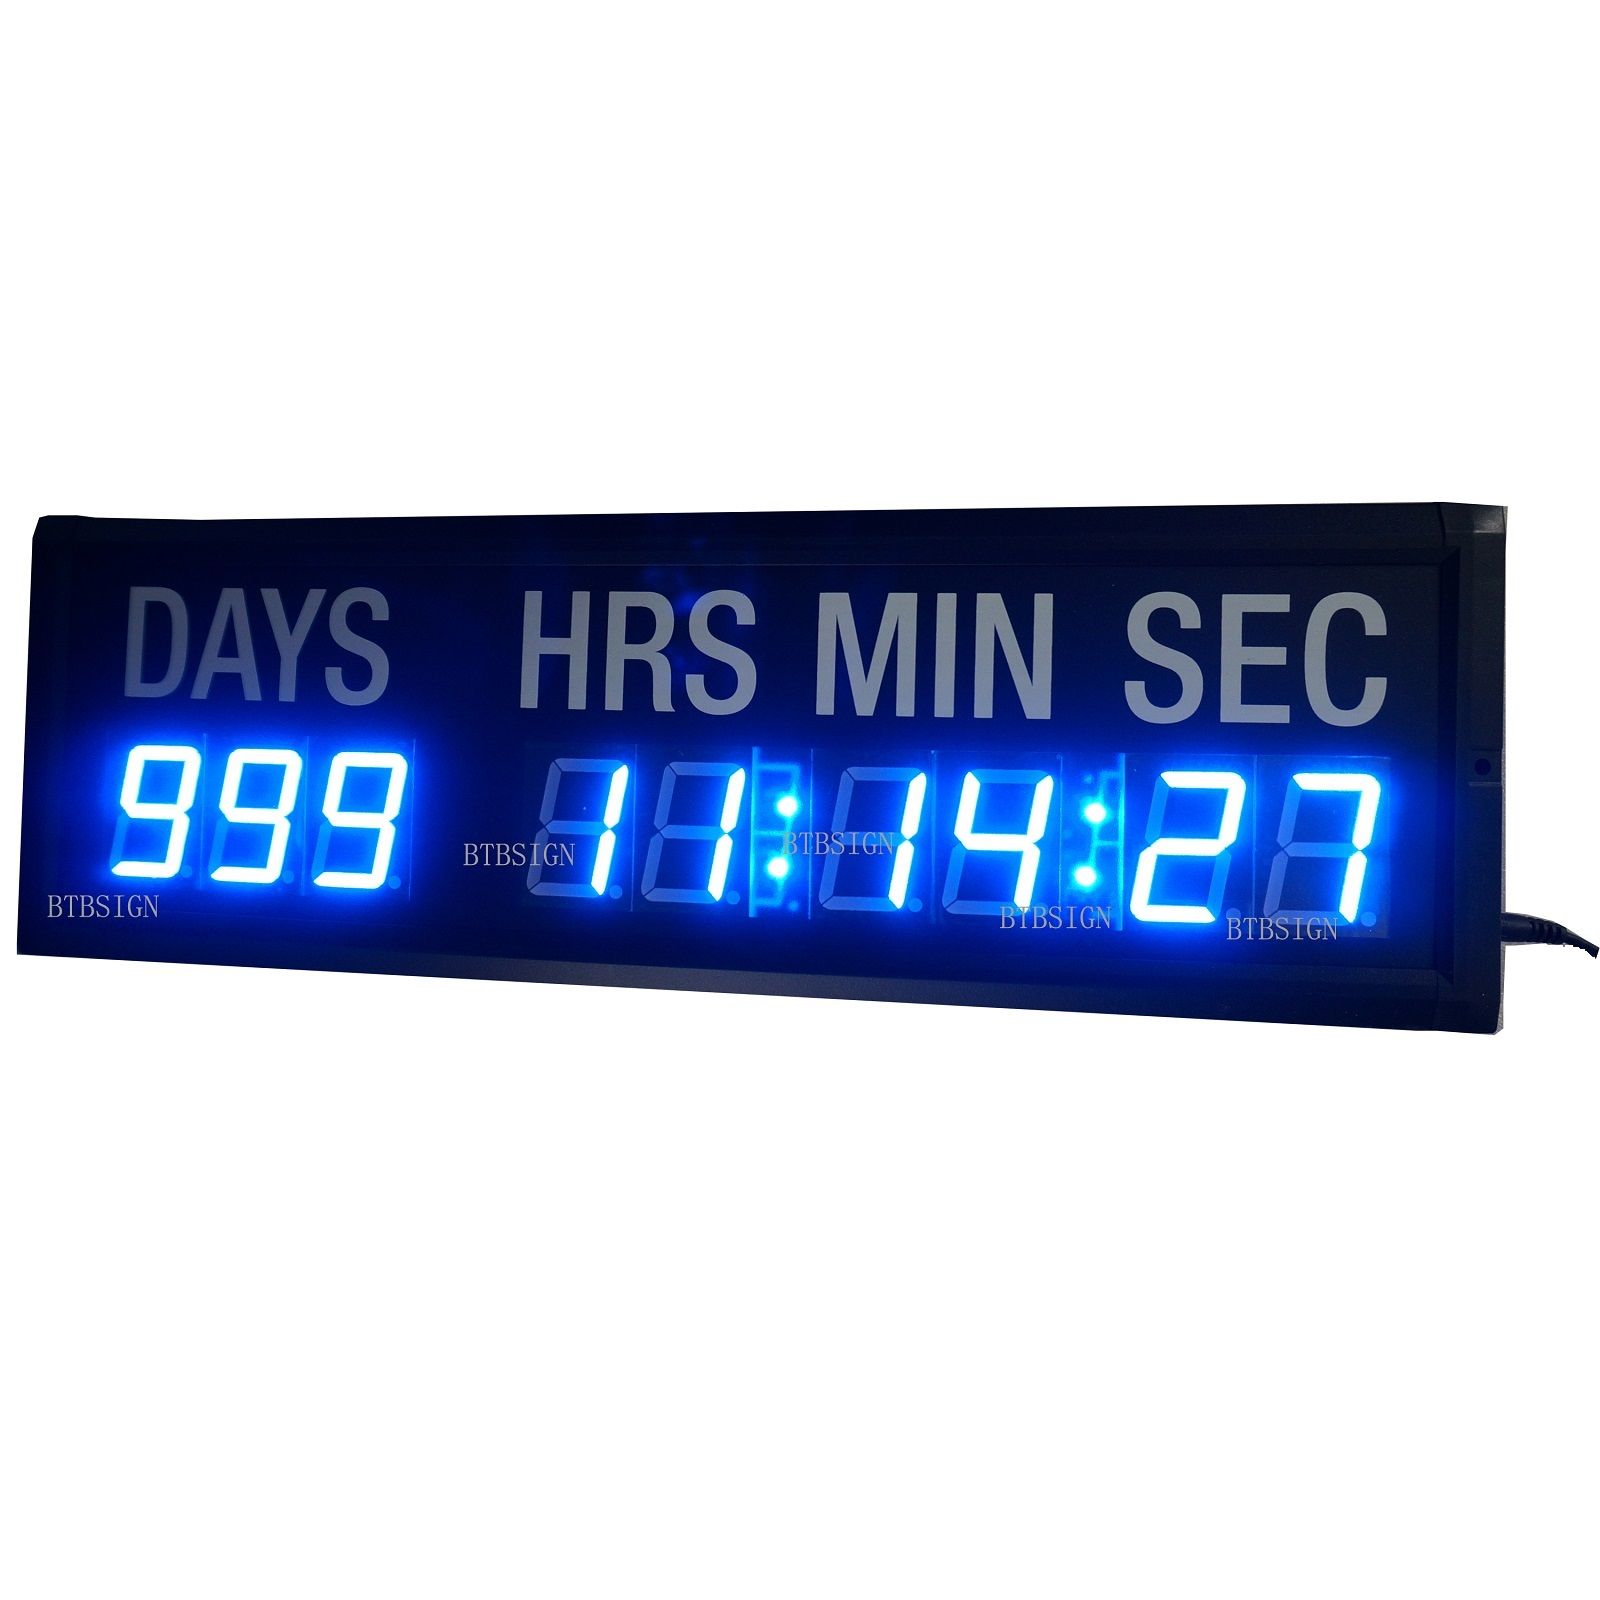 Blue Led Countdown Clock In Days Hours Minutes Seconds Every 24hours Decrease 1 Day ...